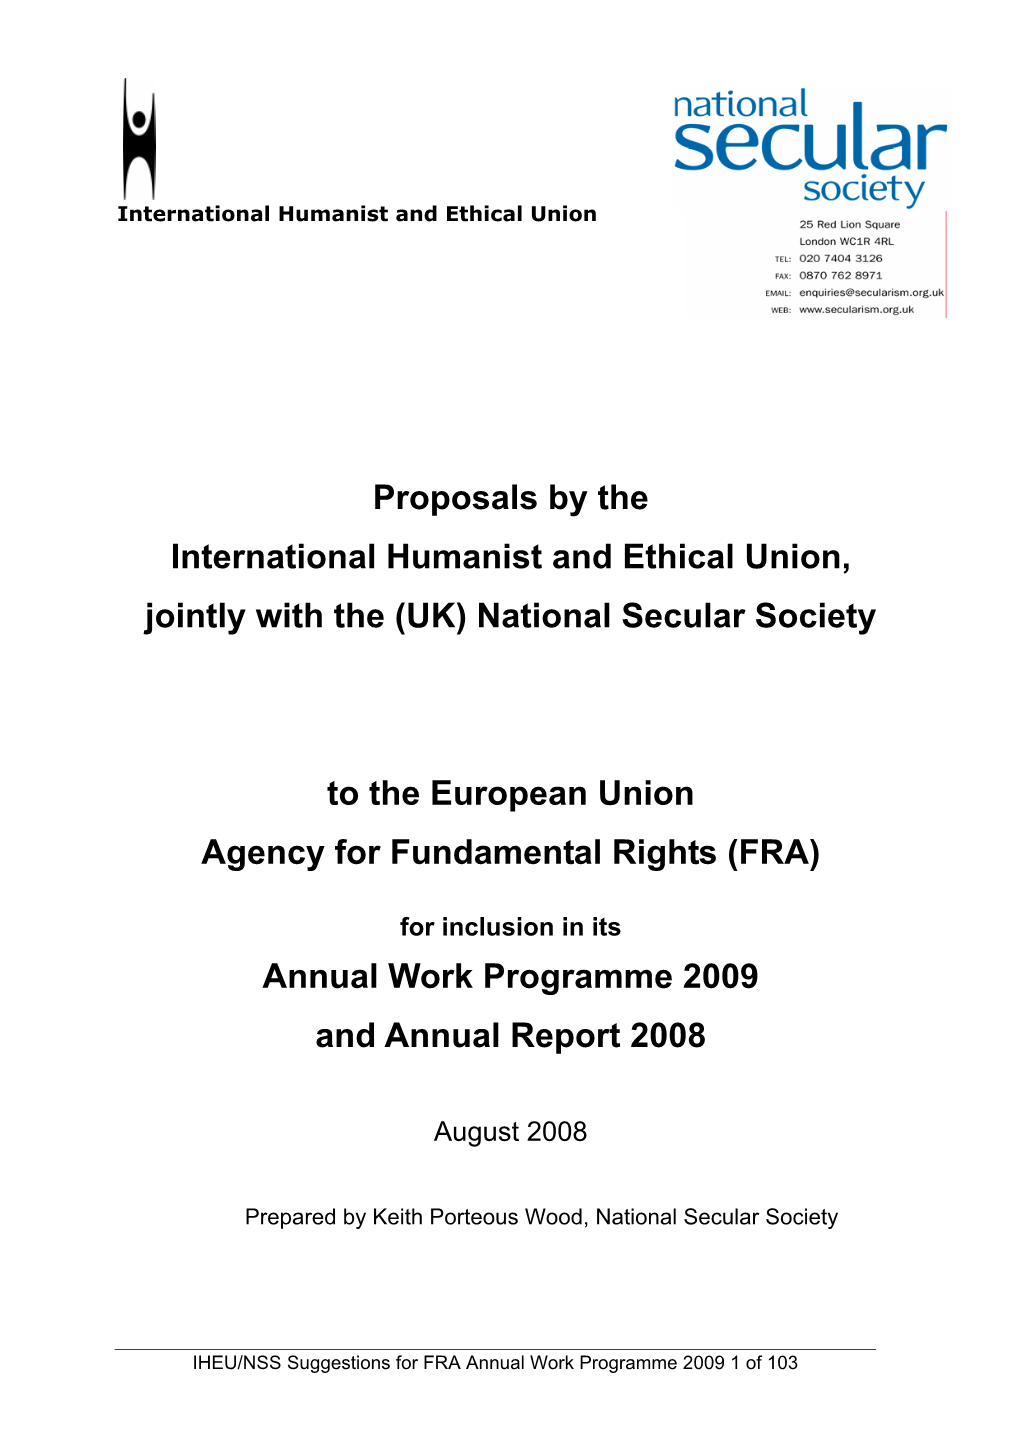 Proposals by the International Humanist and Ethical Union, Jointly with the (UK) National Secular Society